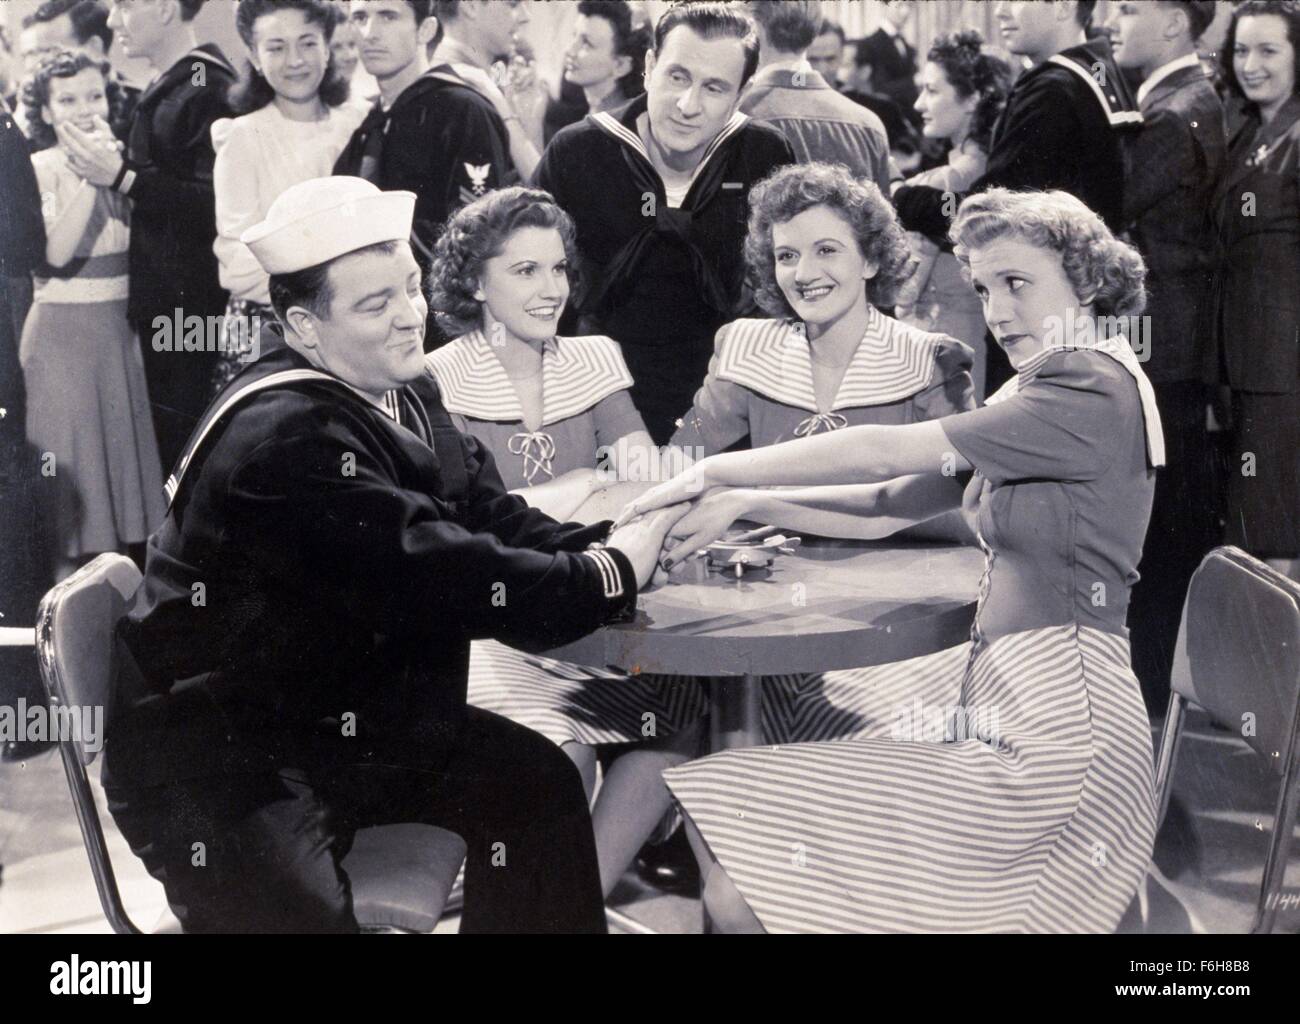 1941, Film Title: IN THE NAVY, Studio: UNIVERSAL, Pictured: 1941, BUD ABBOTT, ANDREW SISTERS/3, AWARDS - ACADEMY, BEST ACTRESS. (Credit Image: SNAP) Stock Photo